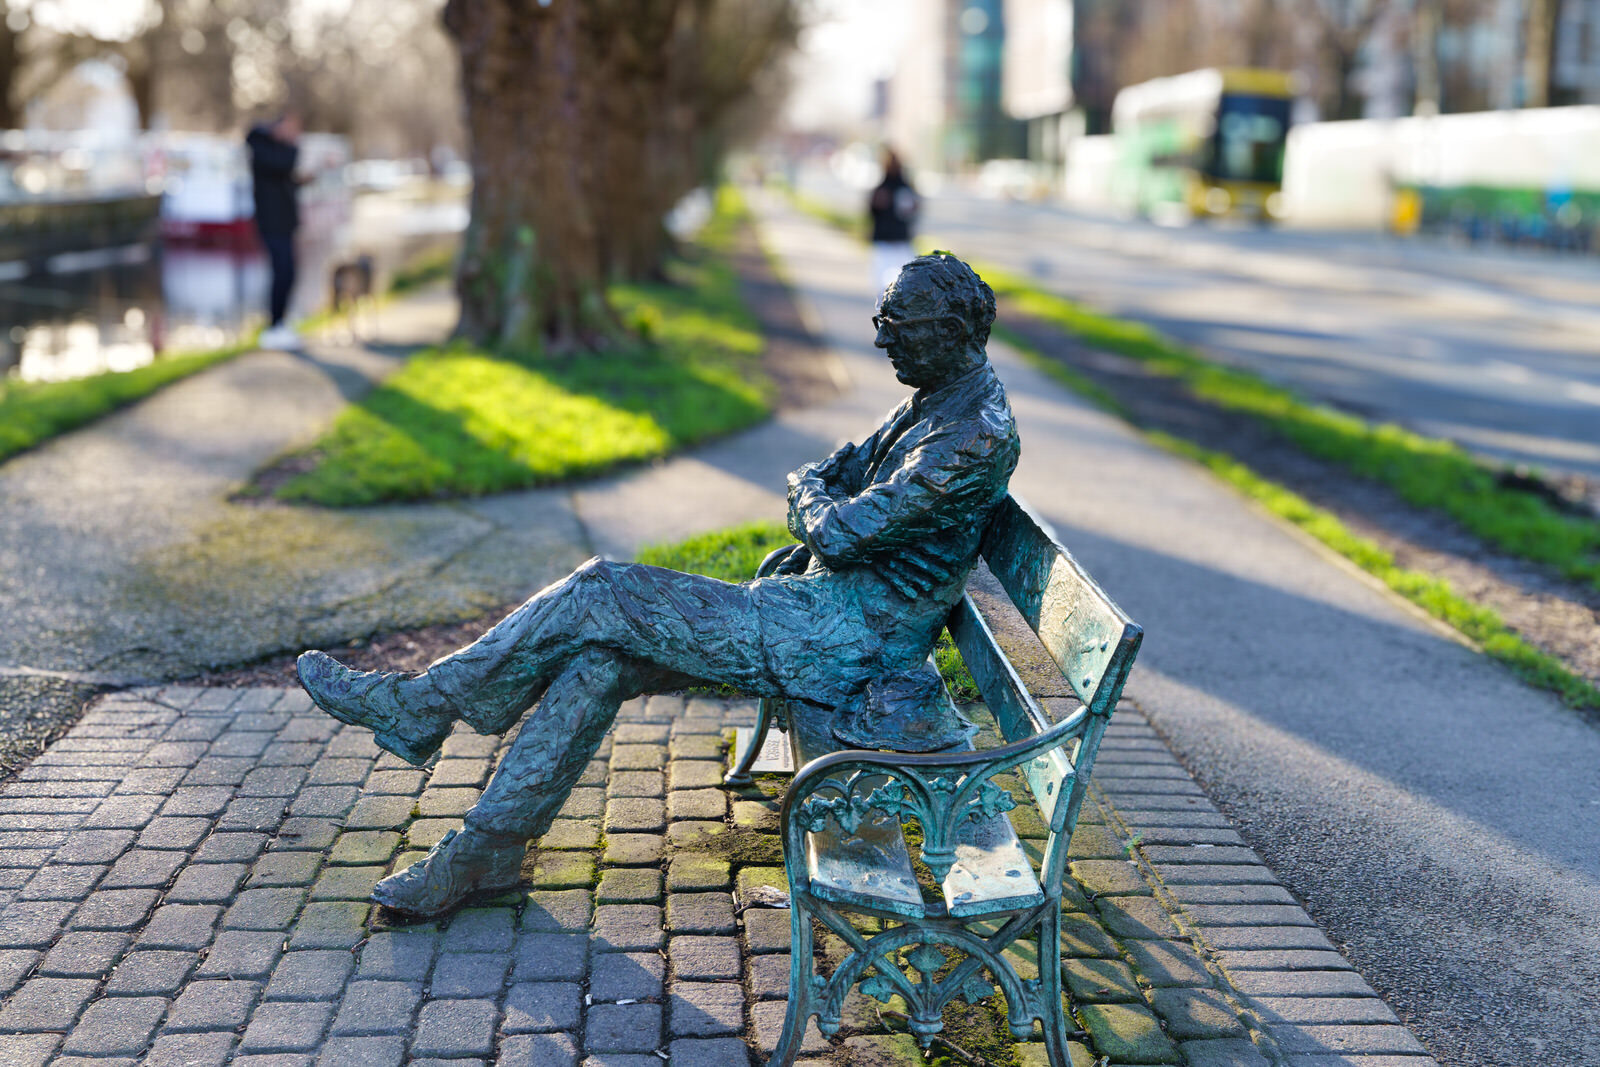 PATRICK KAVANAGH SCULPTURE [PRESENTED TO CITY AND PEOPLE OF DUBLIN BY ZENEZA]-228026-1